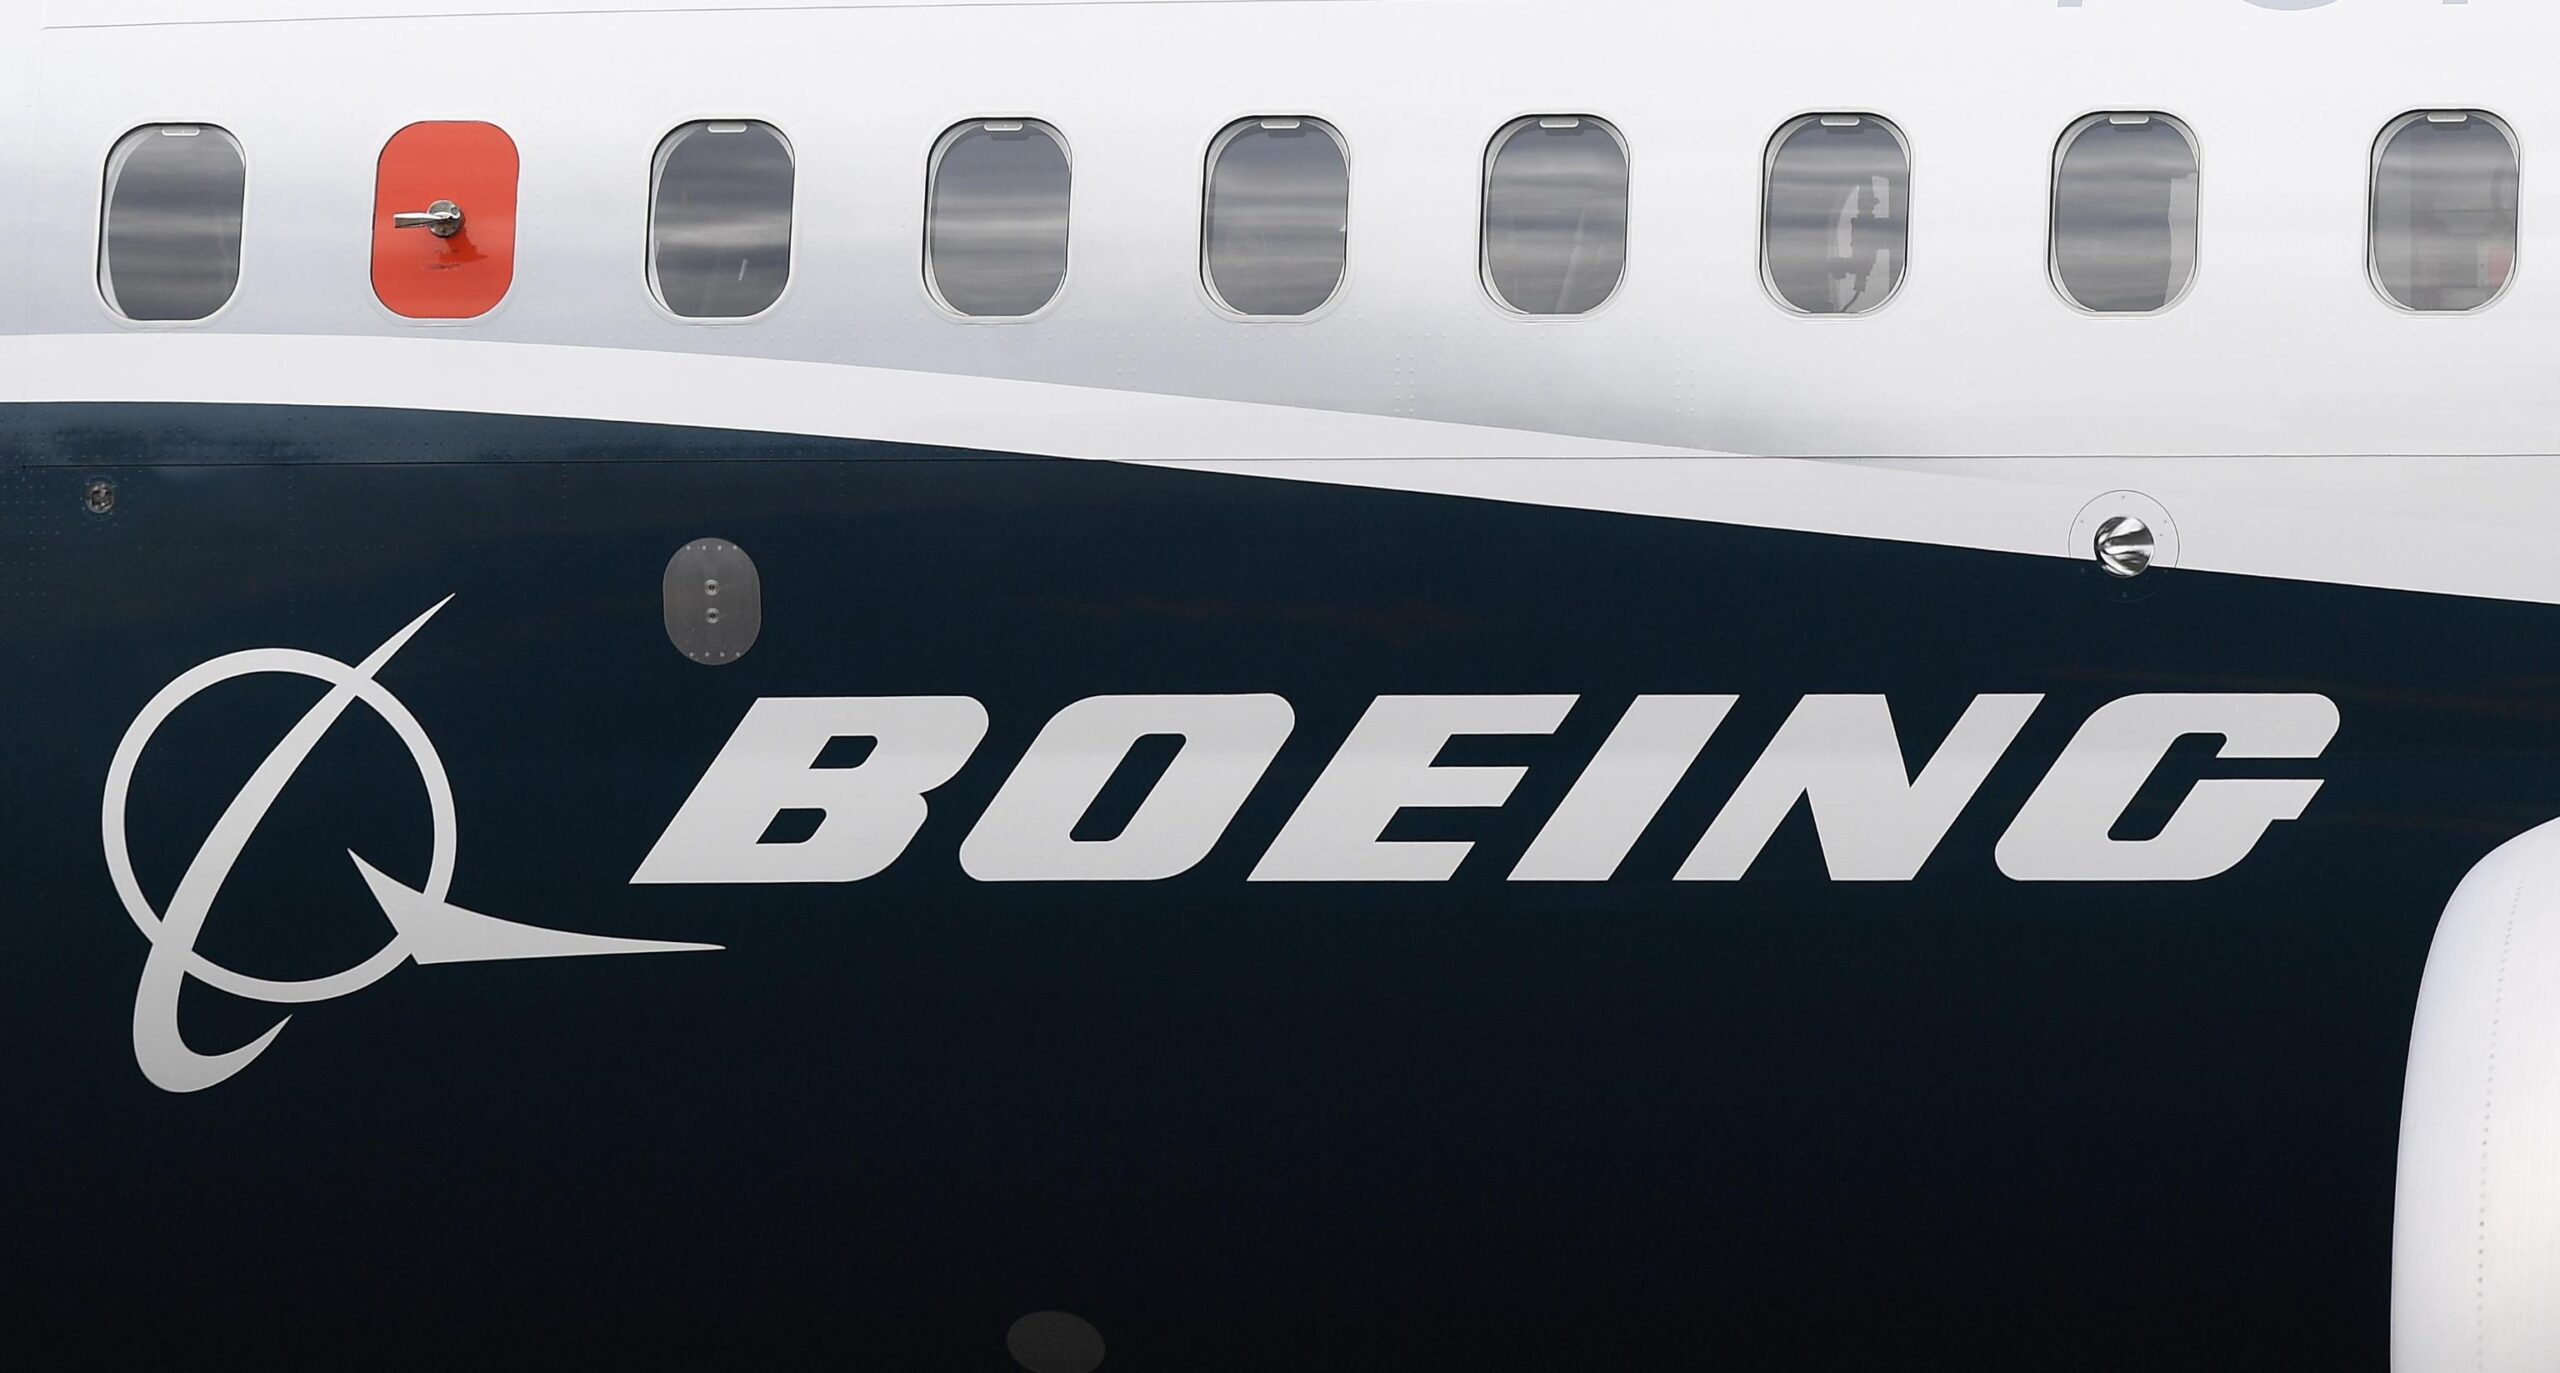 epa07331501 (FILE) - The logo of US aircraft building company Boeing is seen on an aircraft on the opening day of the Farnborough International Airshow (FIA2018), in Farnborough, Britain, 16 July 2018 (reissued 30 January 2019). Boeing on 30 January 2019 released their 4th quarter and full year 2018 results, saying they posted a record operating profit of 4,2 billion USD created by higher volume in the 4th quarter, while the full year 2018 revenue also hit a new record with 101 billion USD. Net earnings for the full year 2018 stood at 10,460 million USD, an increase of 24 per cent from 8,458 million USD in 2017.  EPA/ANDY RAIN